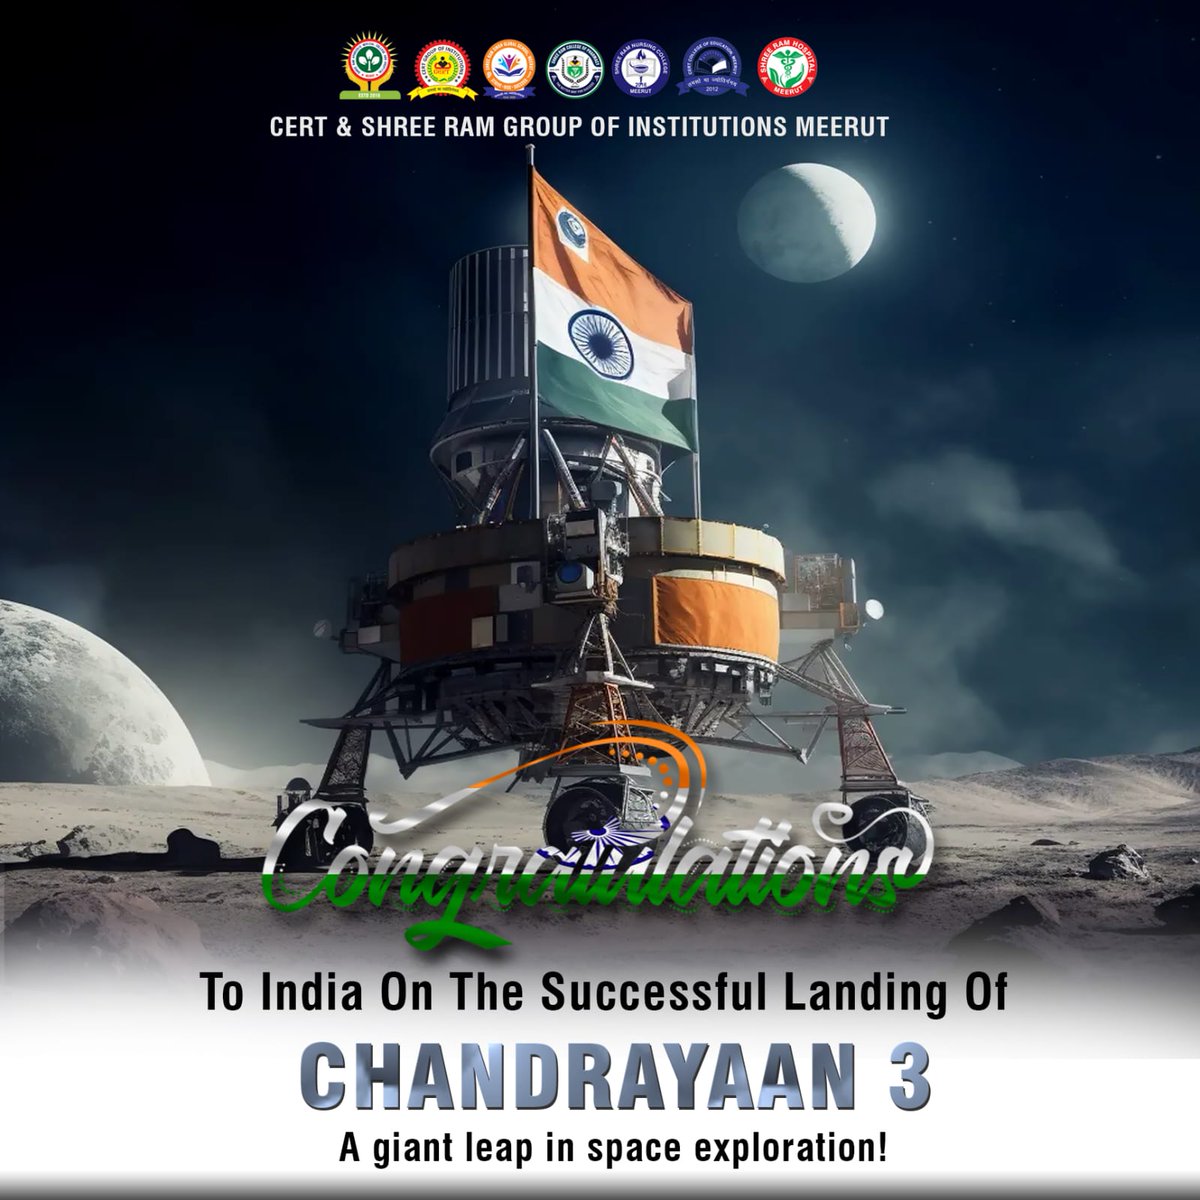 'India's Triumph: Chandrayaan-3 Navigates the Celestial Path to Success 🚀🌕 #SpaceMilestone #ProudMoment' #chandrayan3 #chandrayaan3 #chandrayaan #isro #isromissions #isroindia #isro #isro_india #mission #instagood #instagram #ikea #reels #viral #viralvideos #viwes #Trending